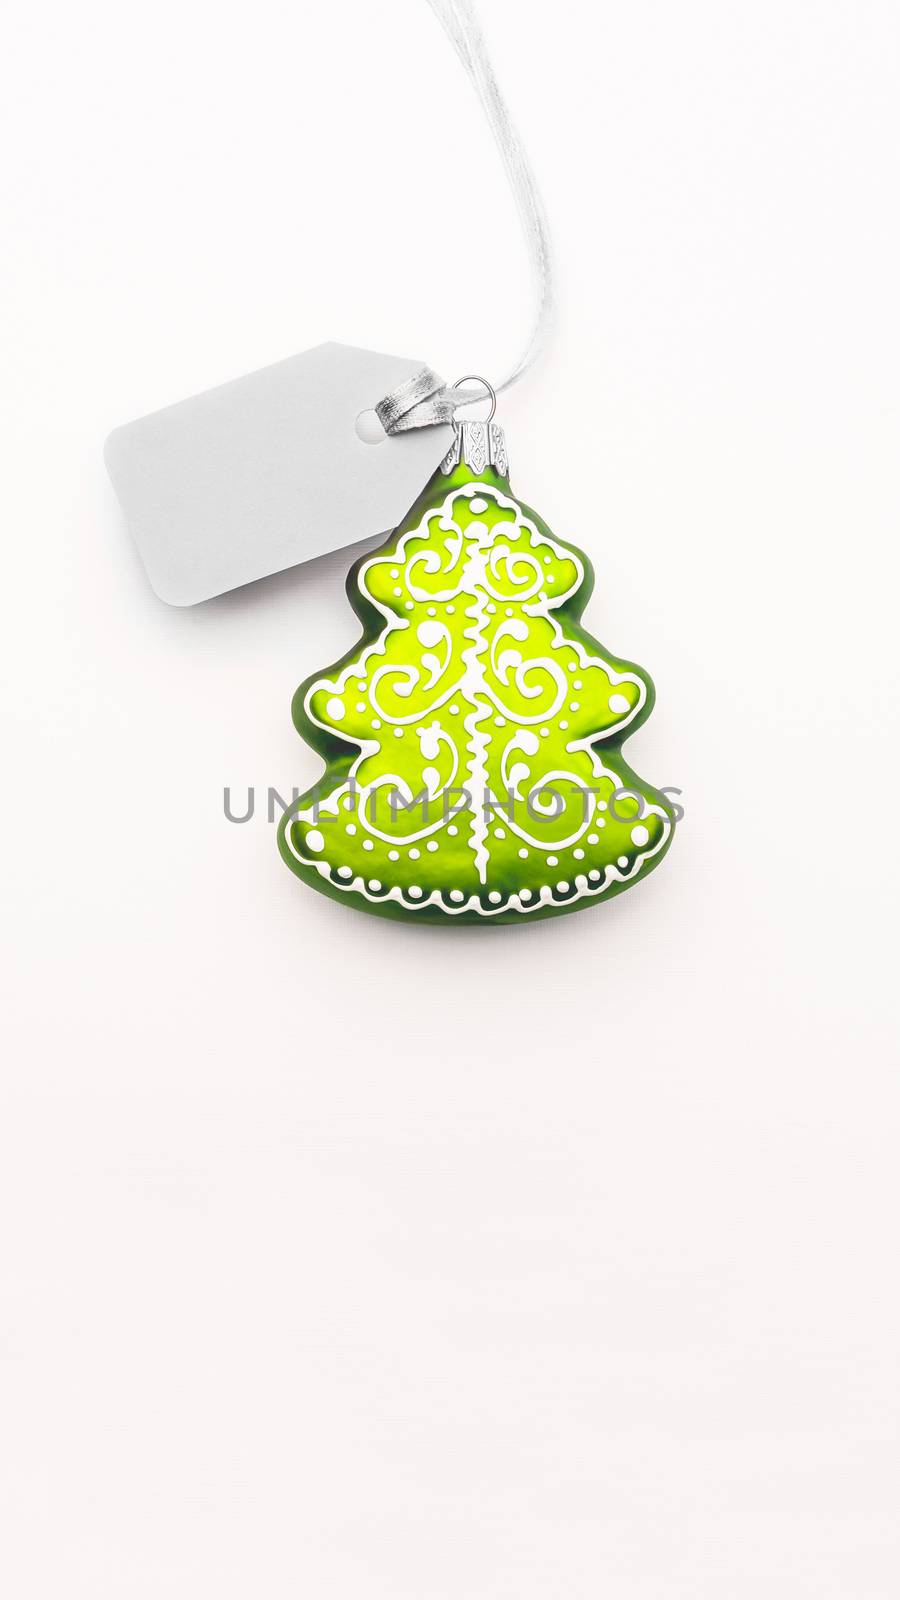 Decorative Christmas tree with grey price tag on white backgrou by aksenovko